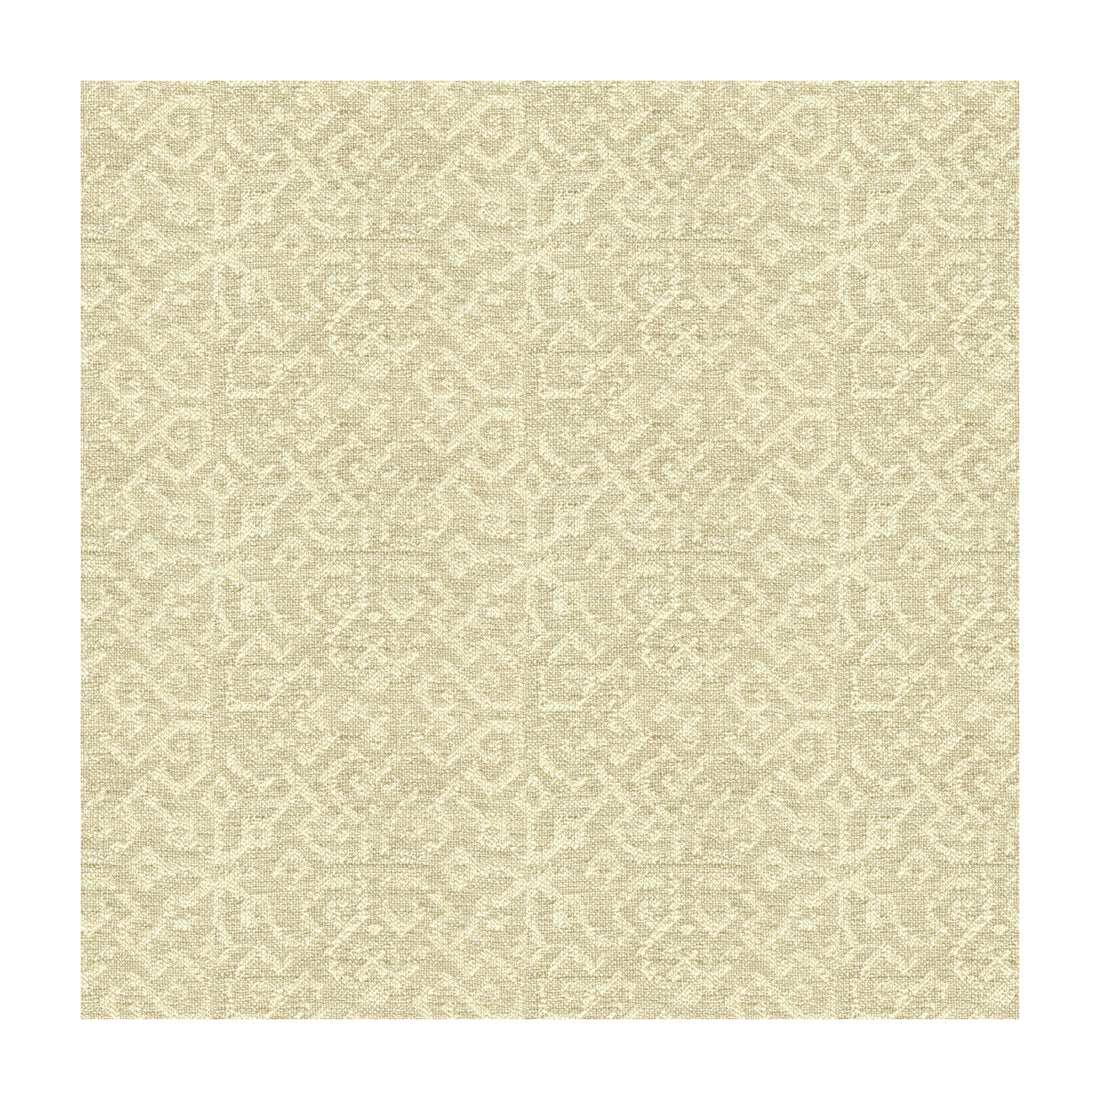 Chantilly Weave fabric in beige color - pattern 2014119.16.0 - by Lee Jofa in the Suzanne Kasler II collection